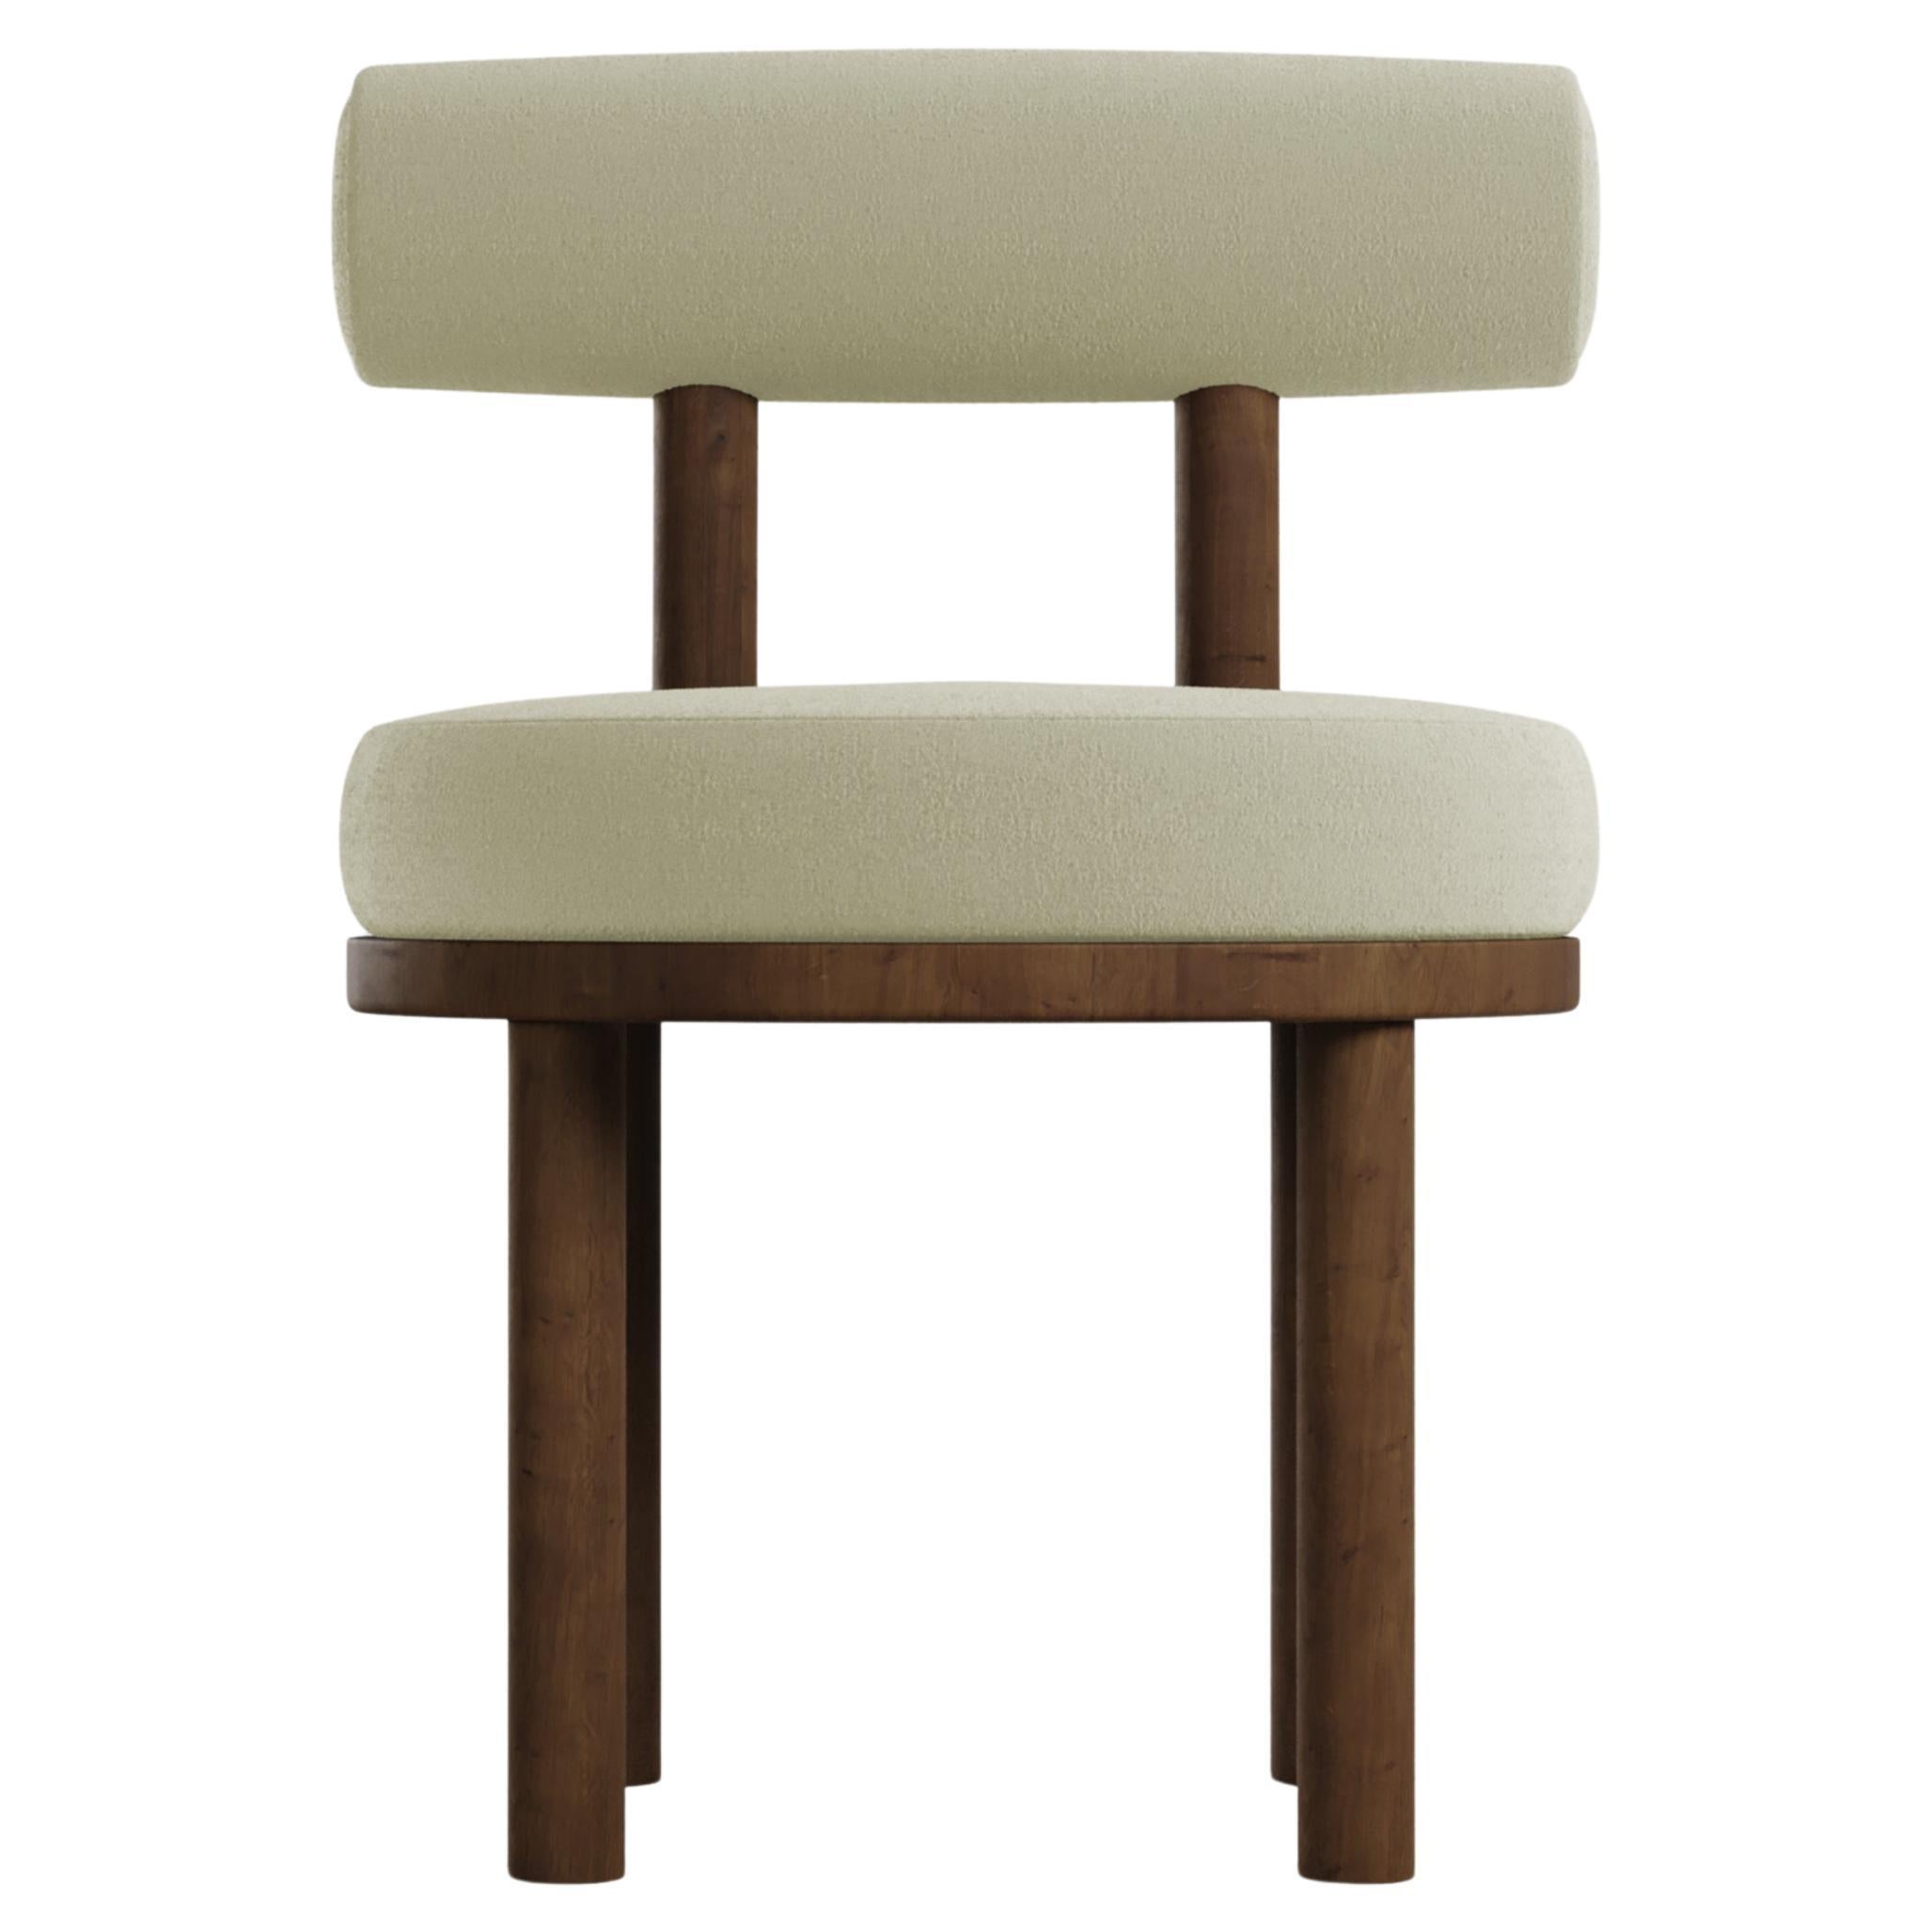 Modern Moca Chair in bouclé Beige & Smoked Oak Made in Portugal by Collector For Sale